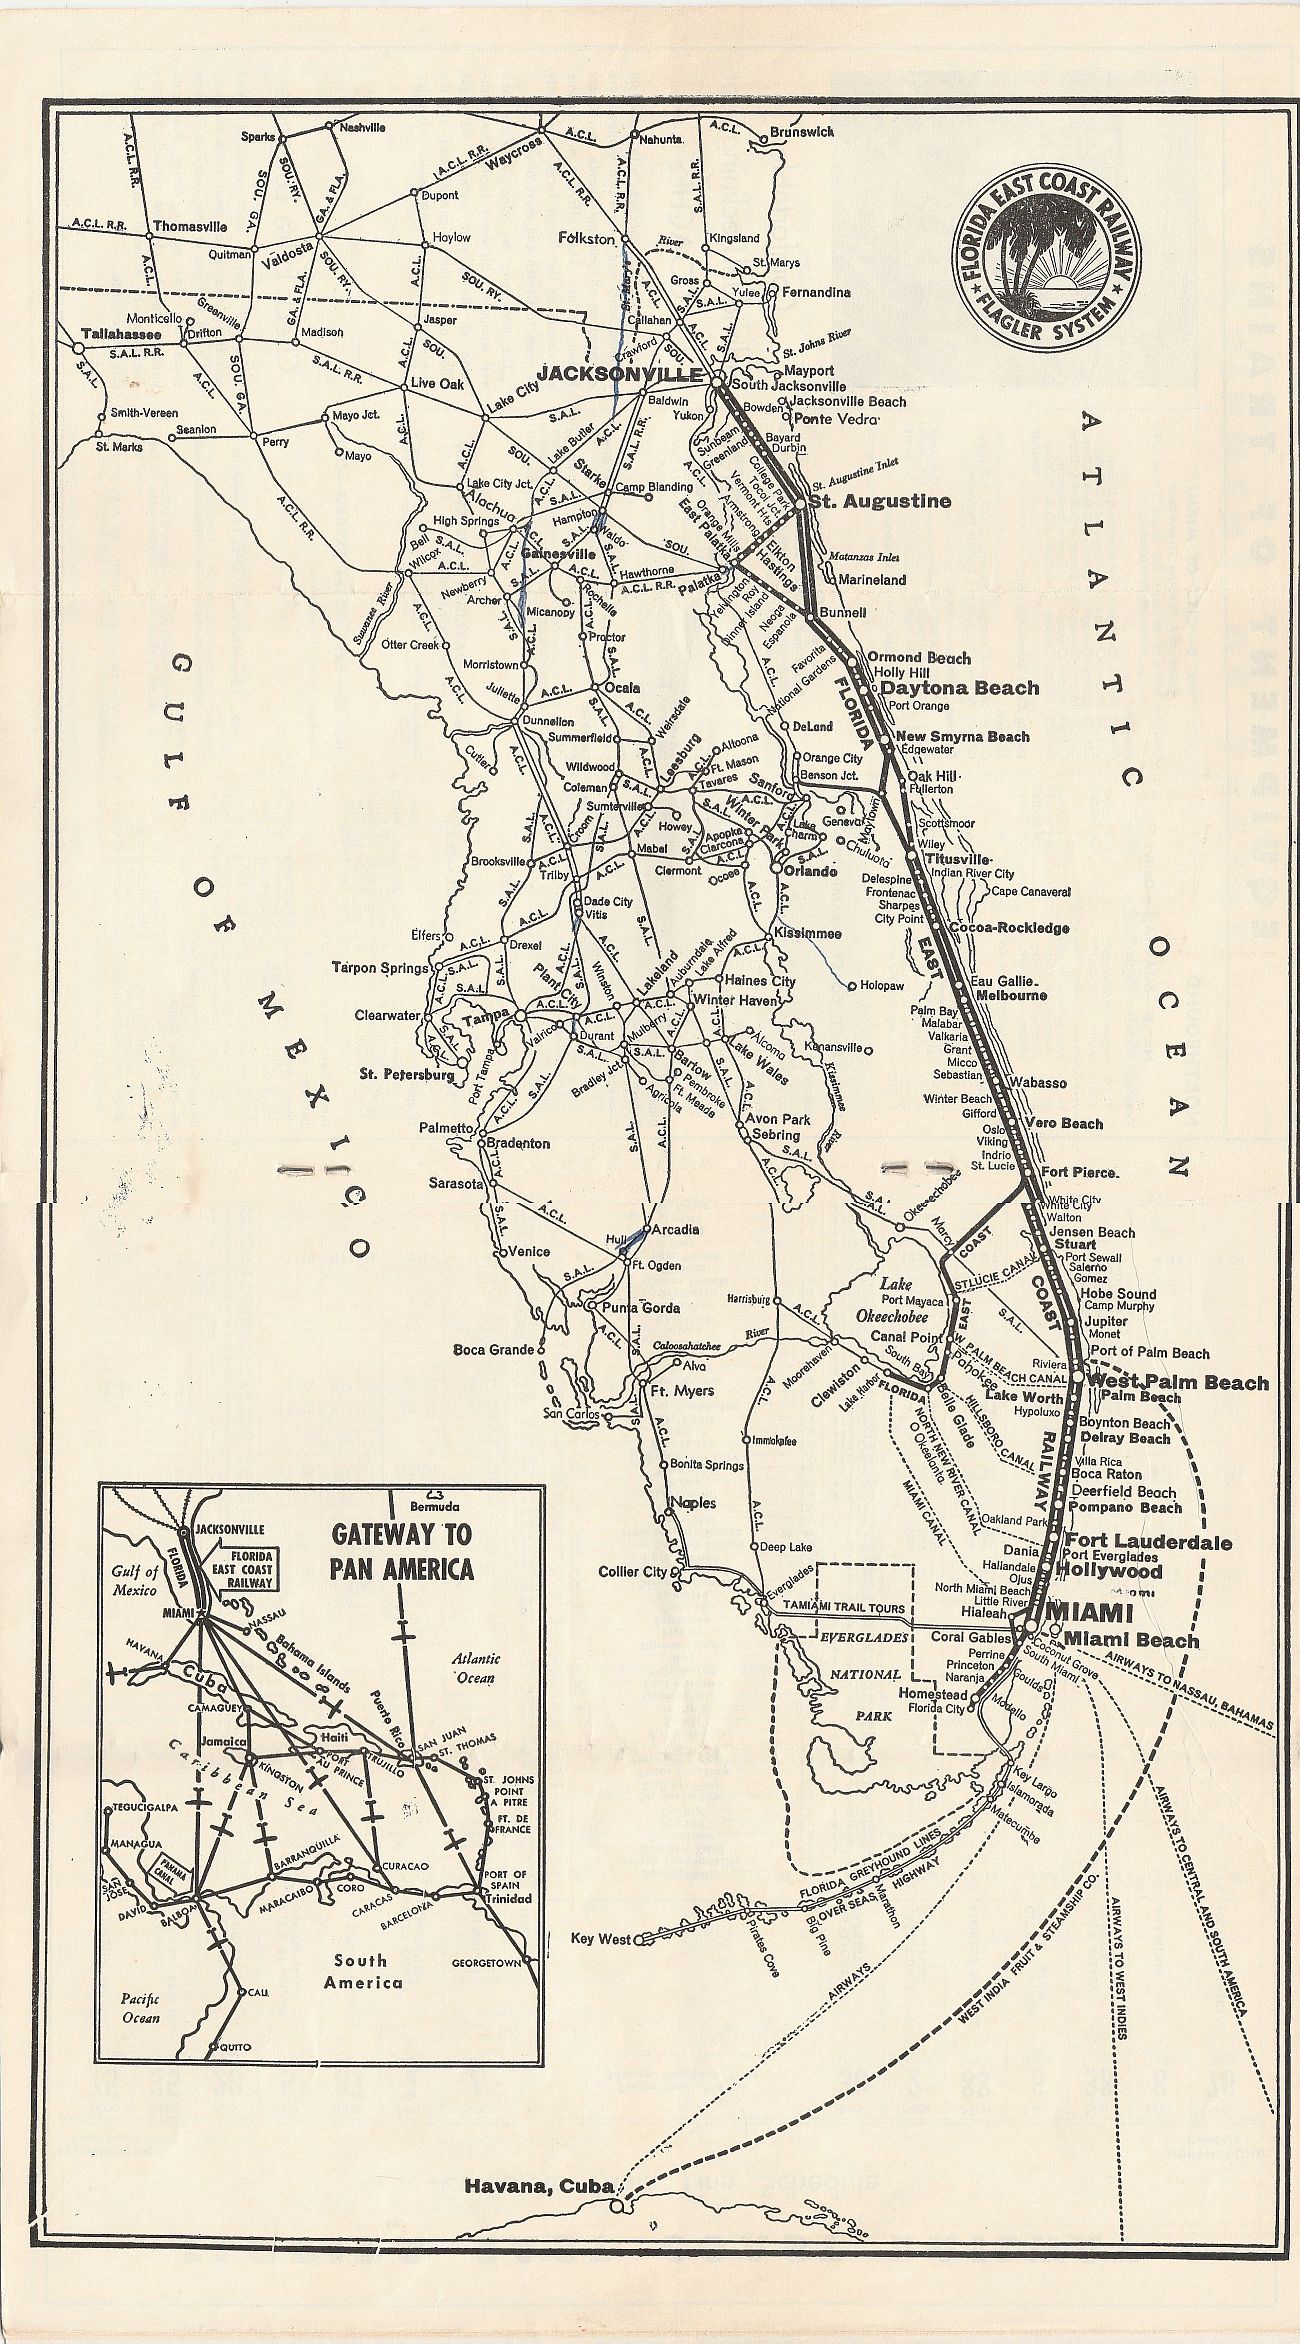 Florida East Coast Railway Dec. 12, 1957 timetable Pg. 15-18: Route Map Complete and accurate detailed 1957 route map showing every station of the Florida East Coast Railway